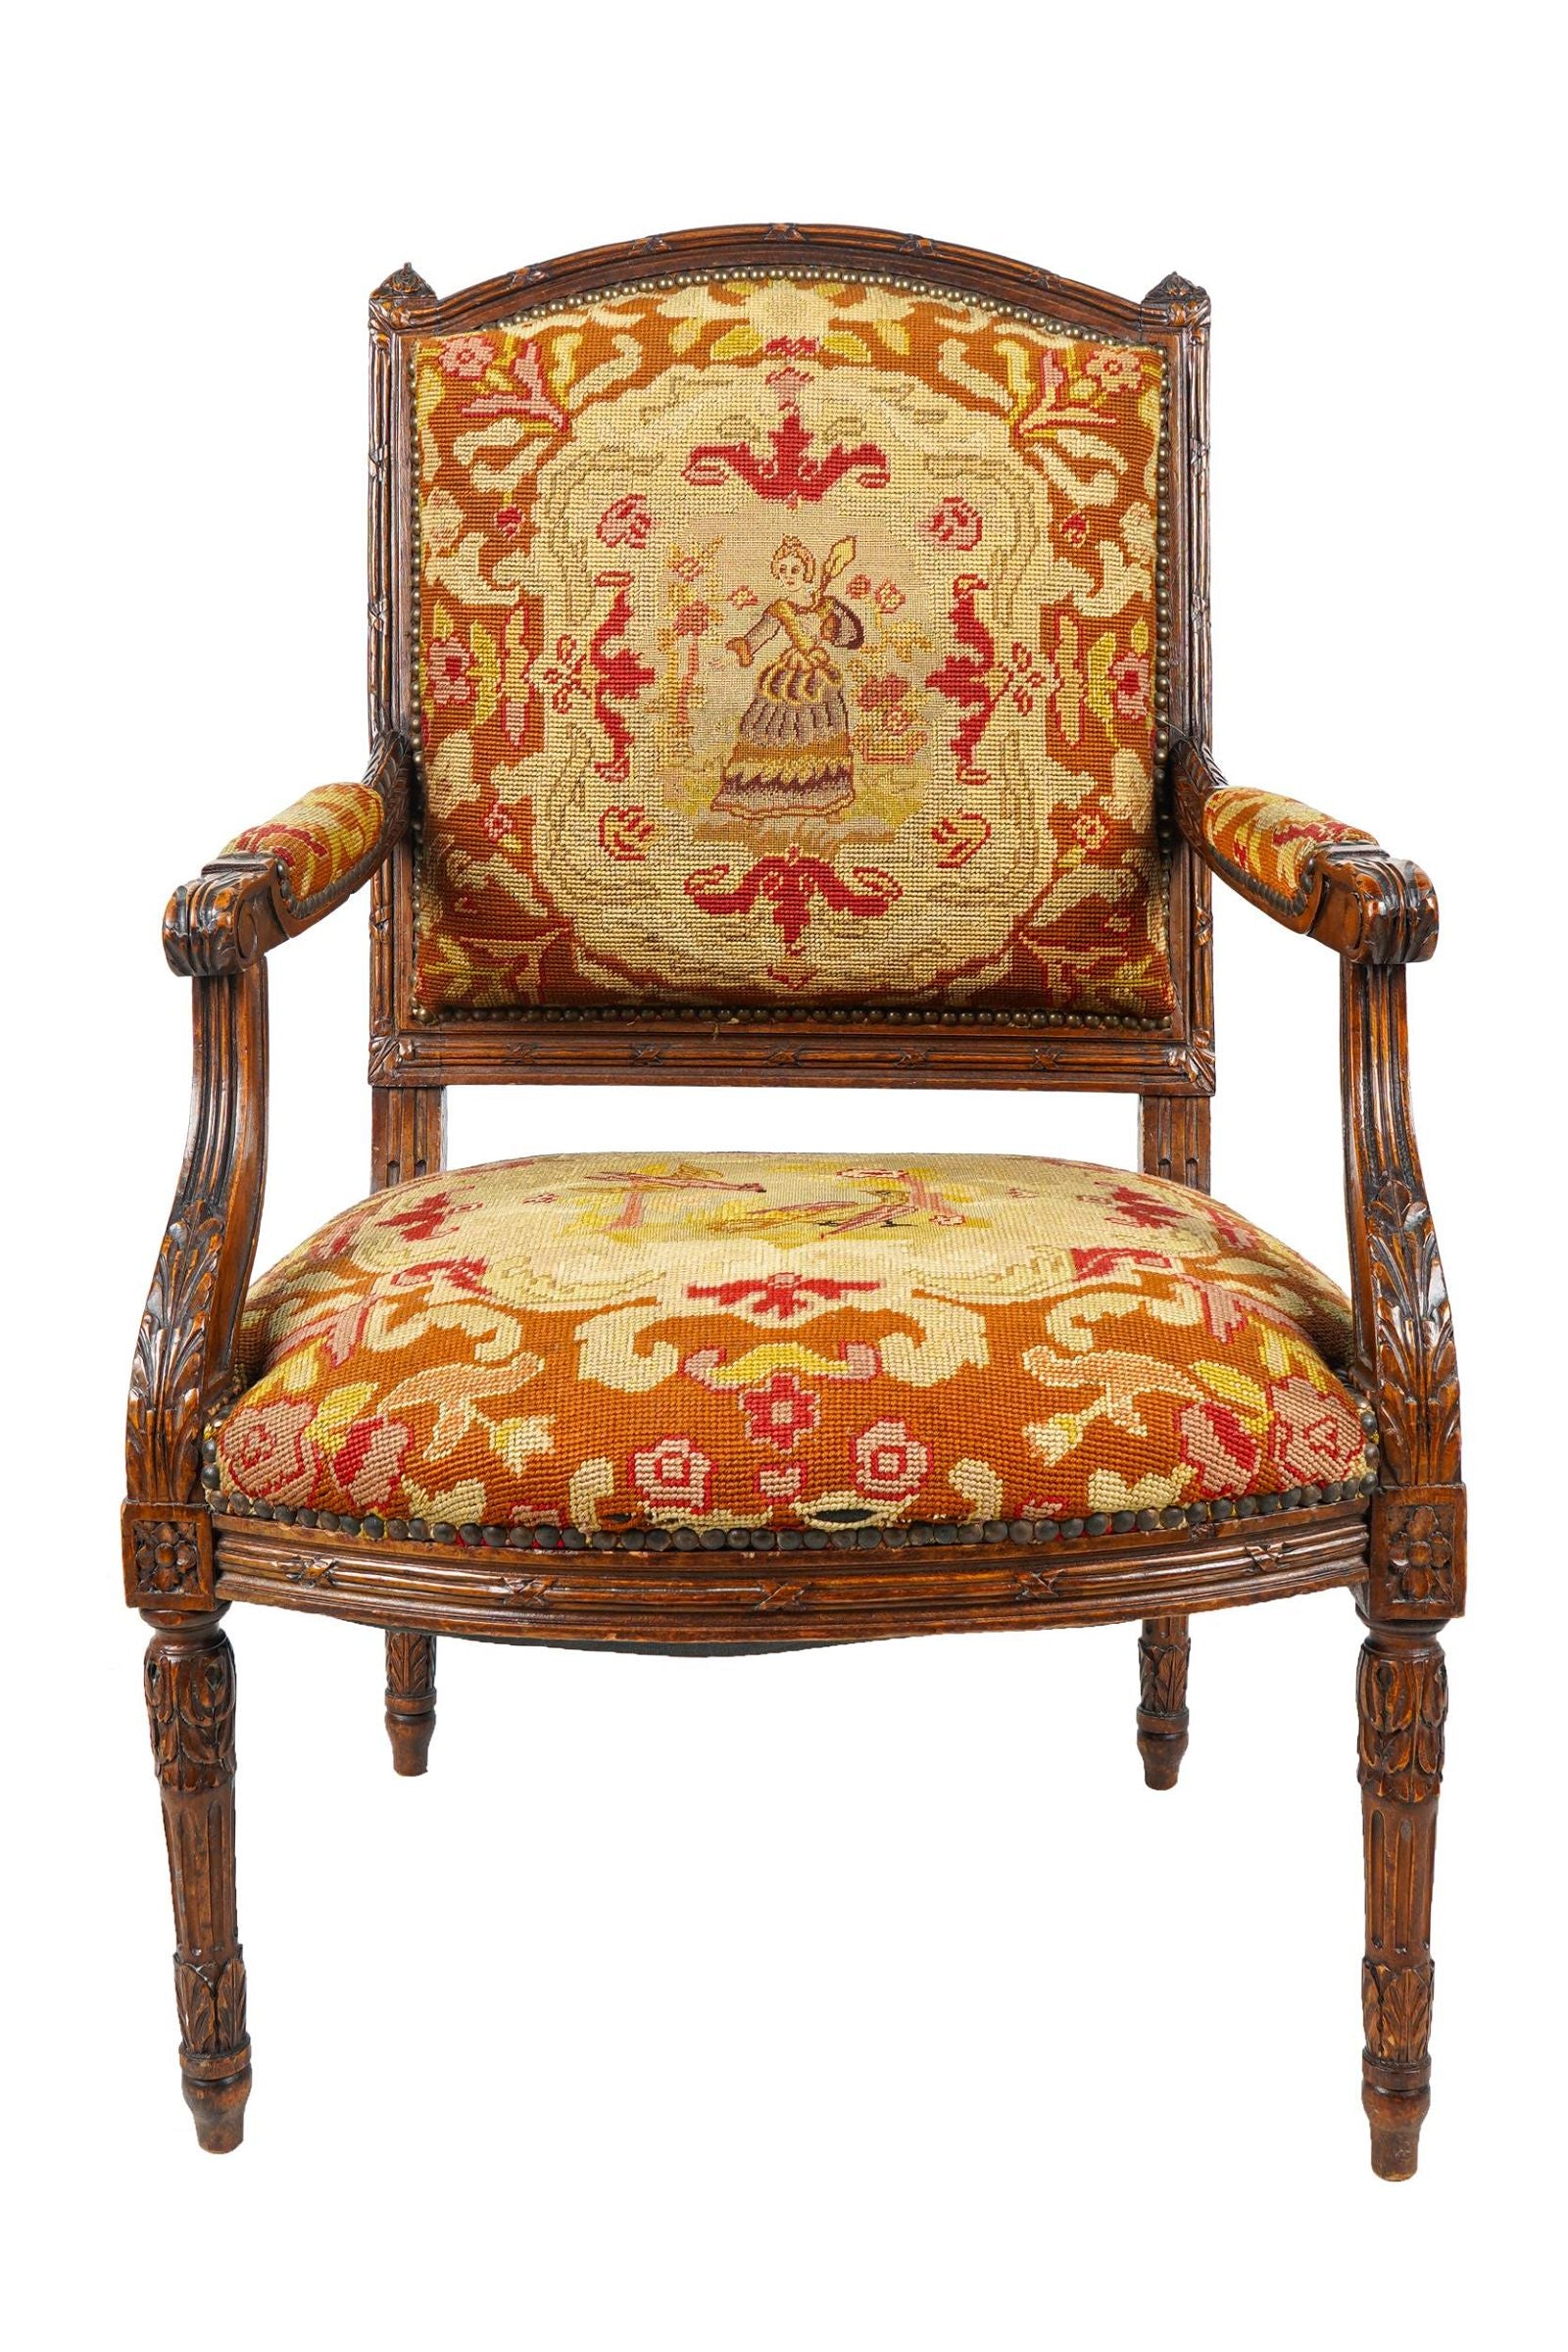 AF2-012: ANTIQUE LATE 19TH CENTURY FRENCH LOUIS XVI STYLE CARVED WALNUT FAUTEUIL